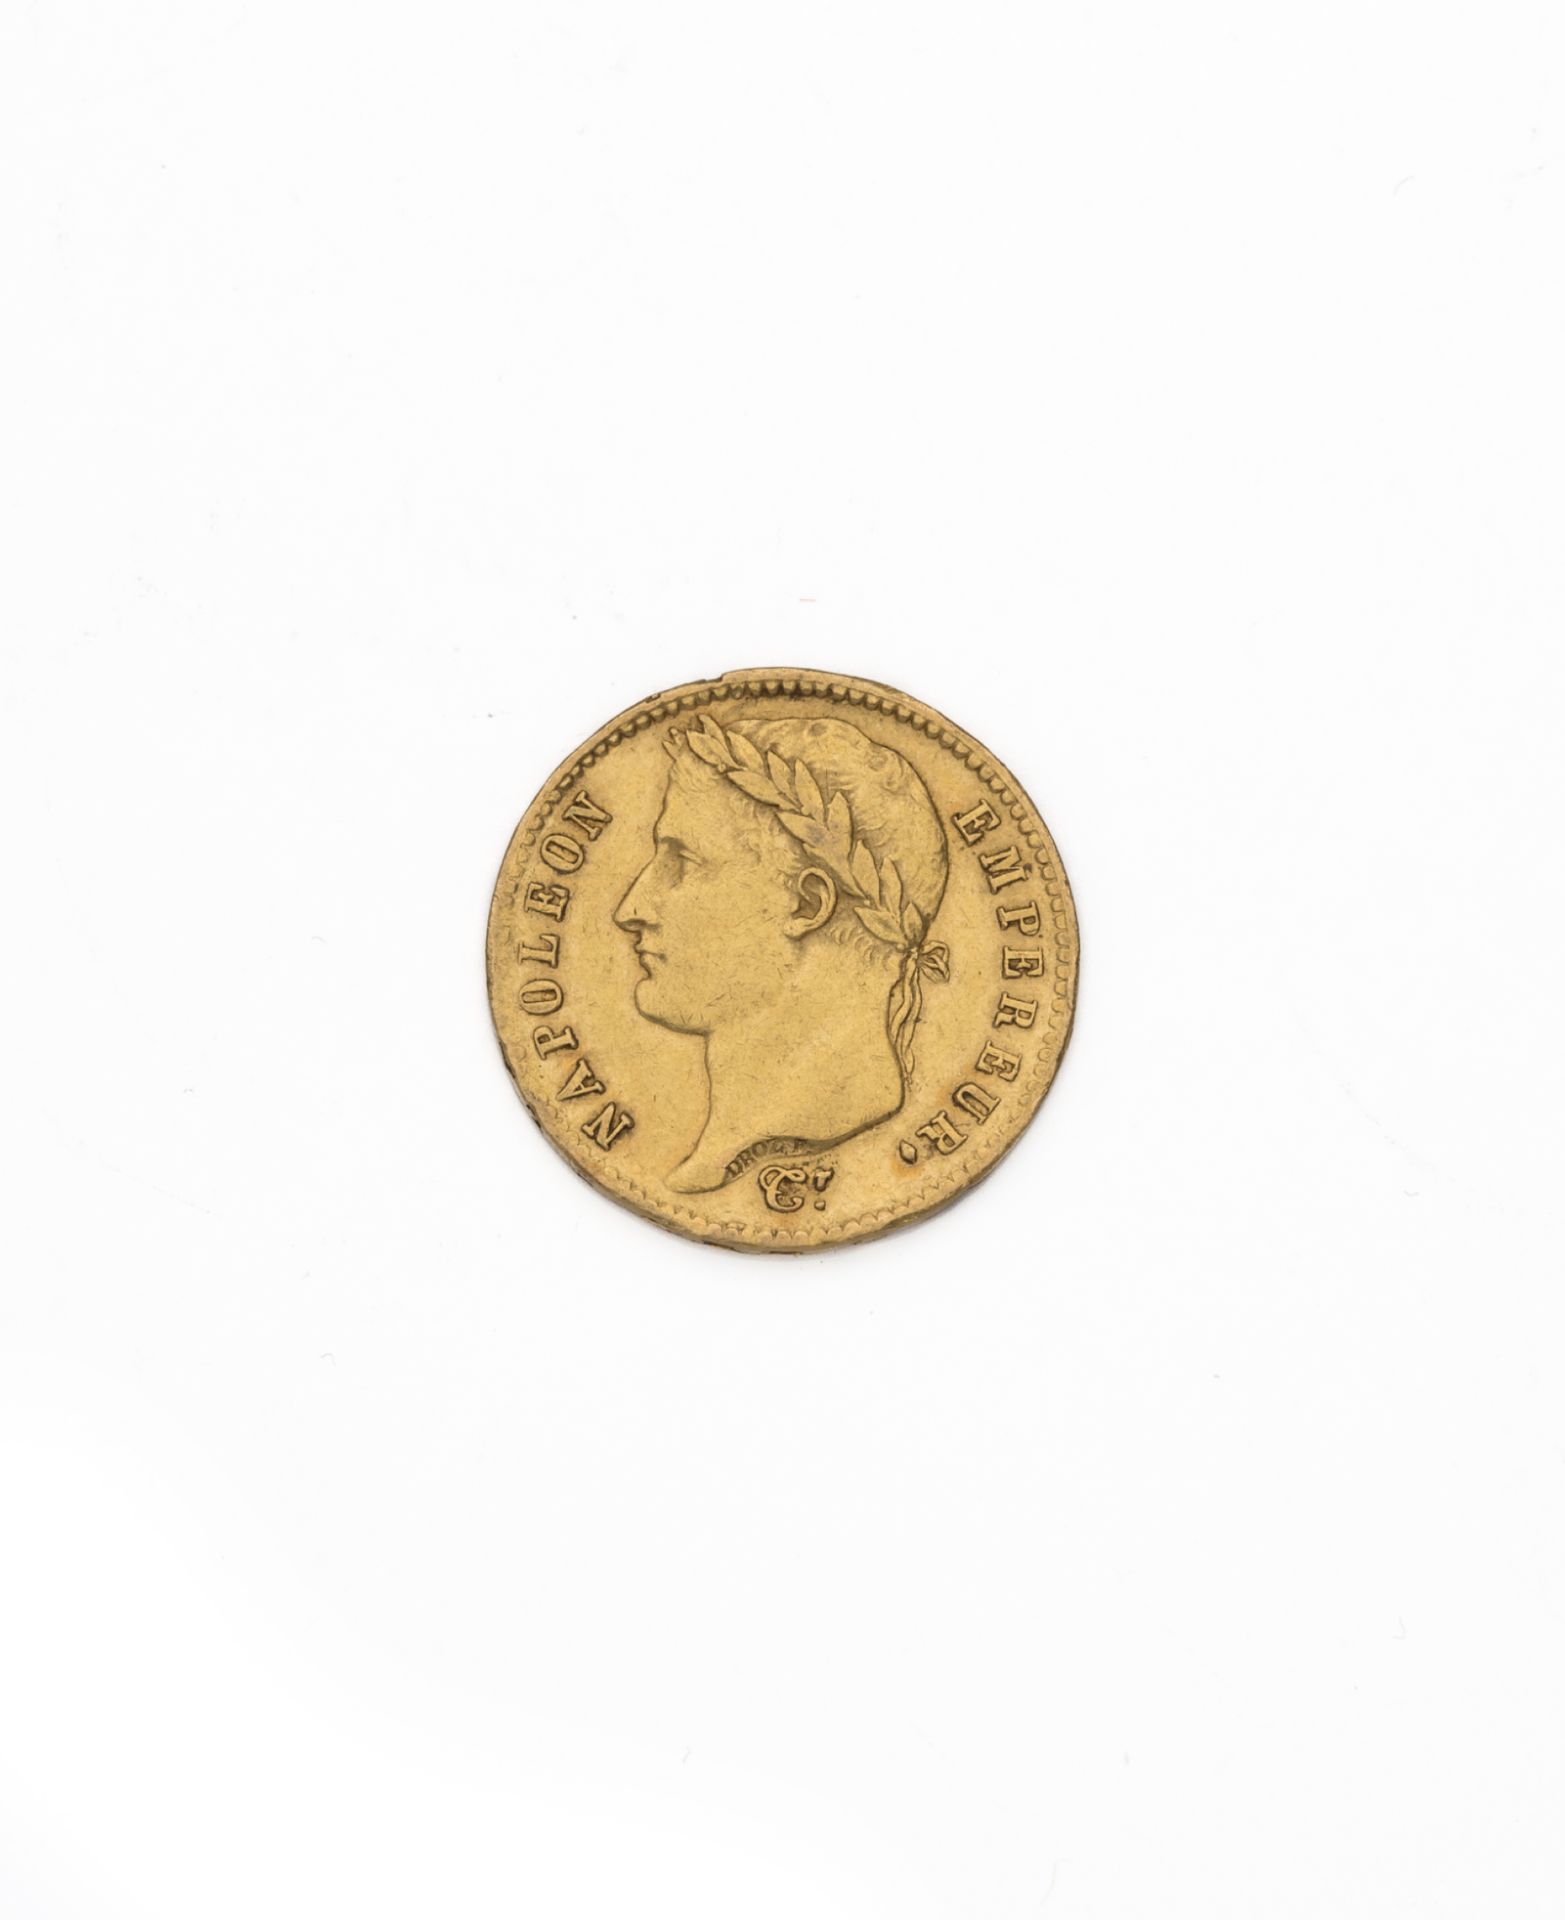 Null FIRST EMPIRE
20 franc gold, Napoleon emperor head. 1808 A 
Weight : 6,41 g